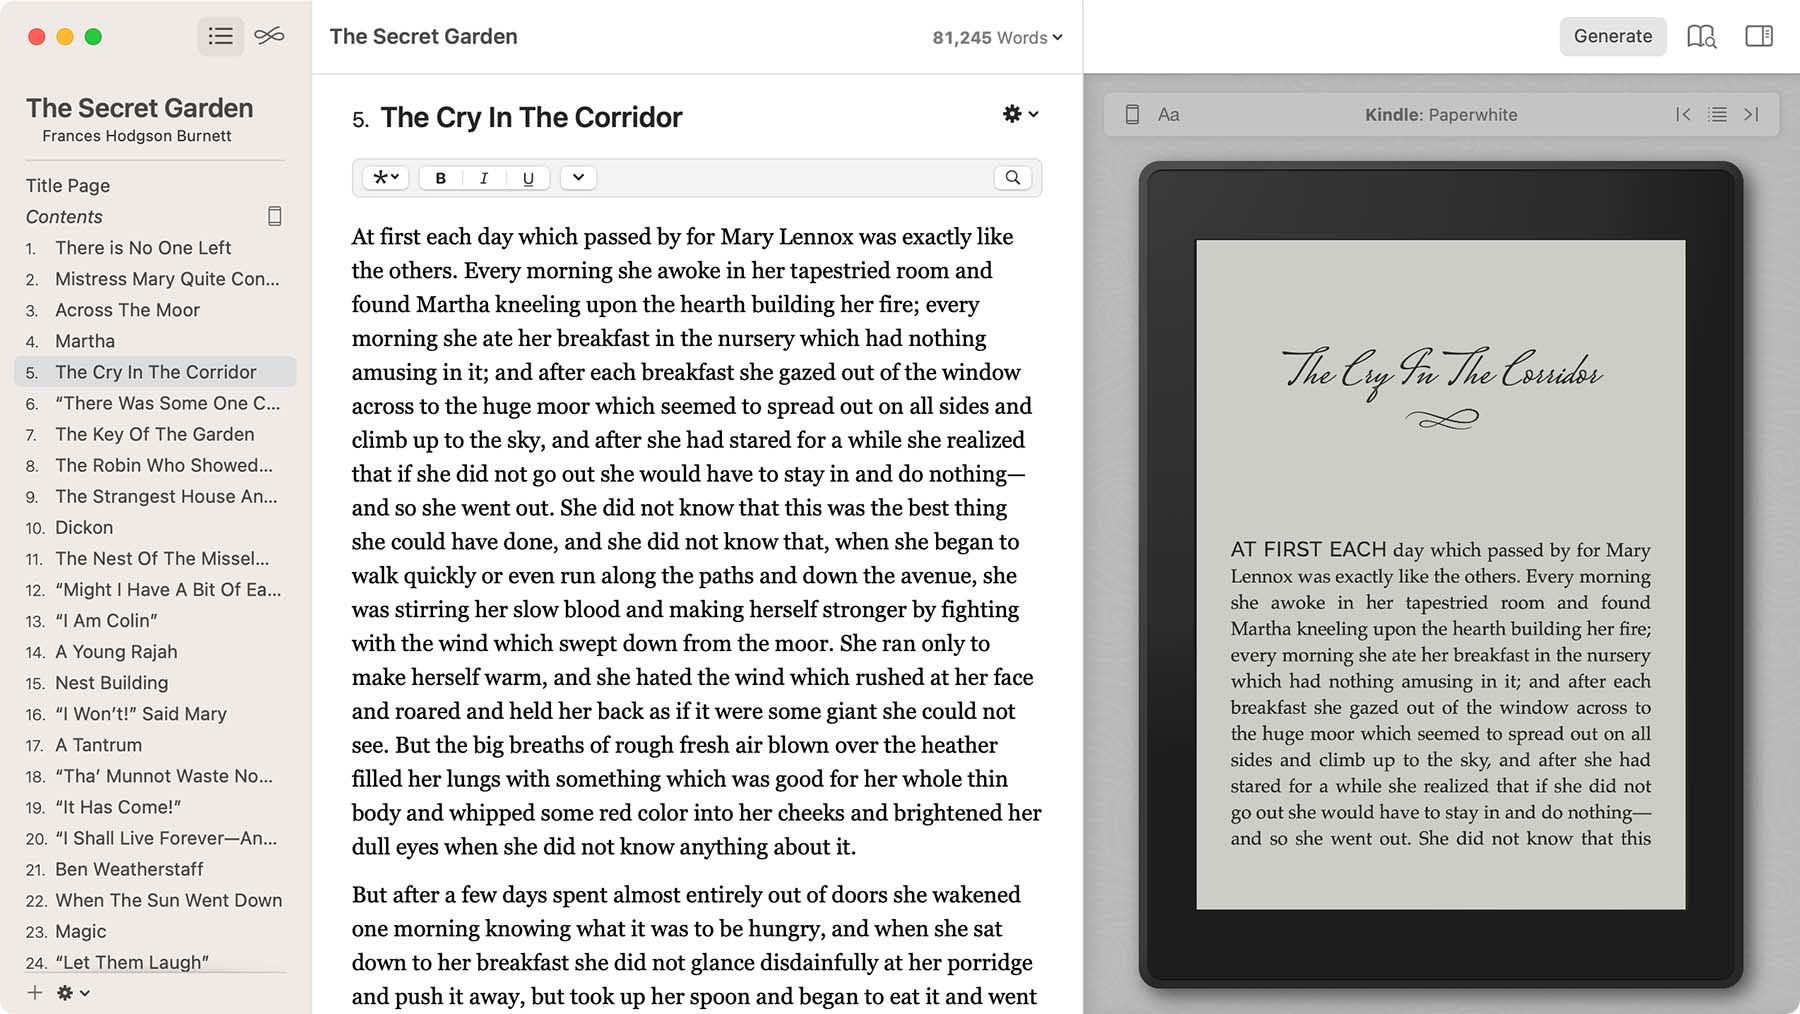 kindle previewer says no table of contents